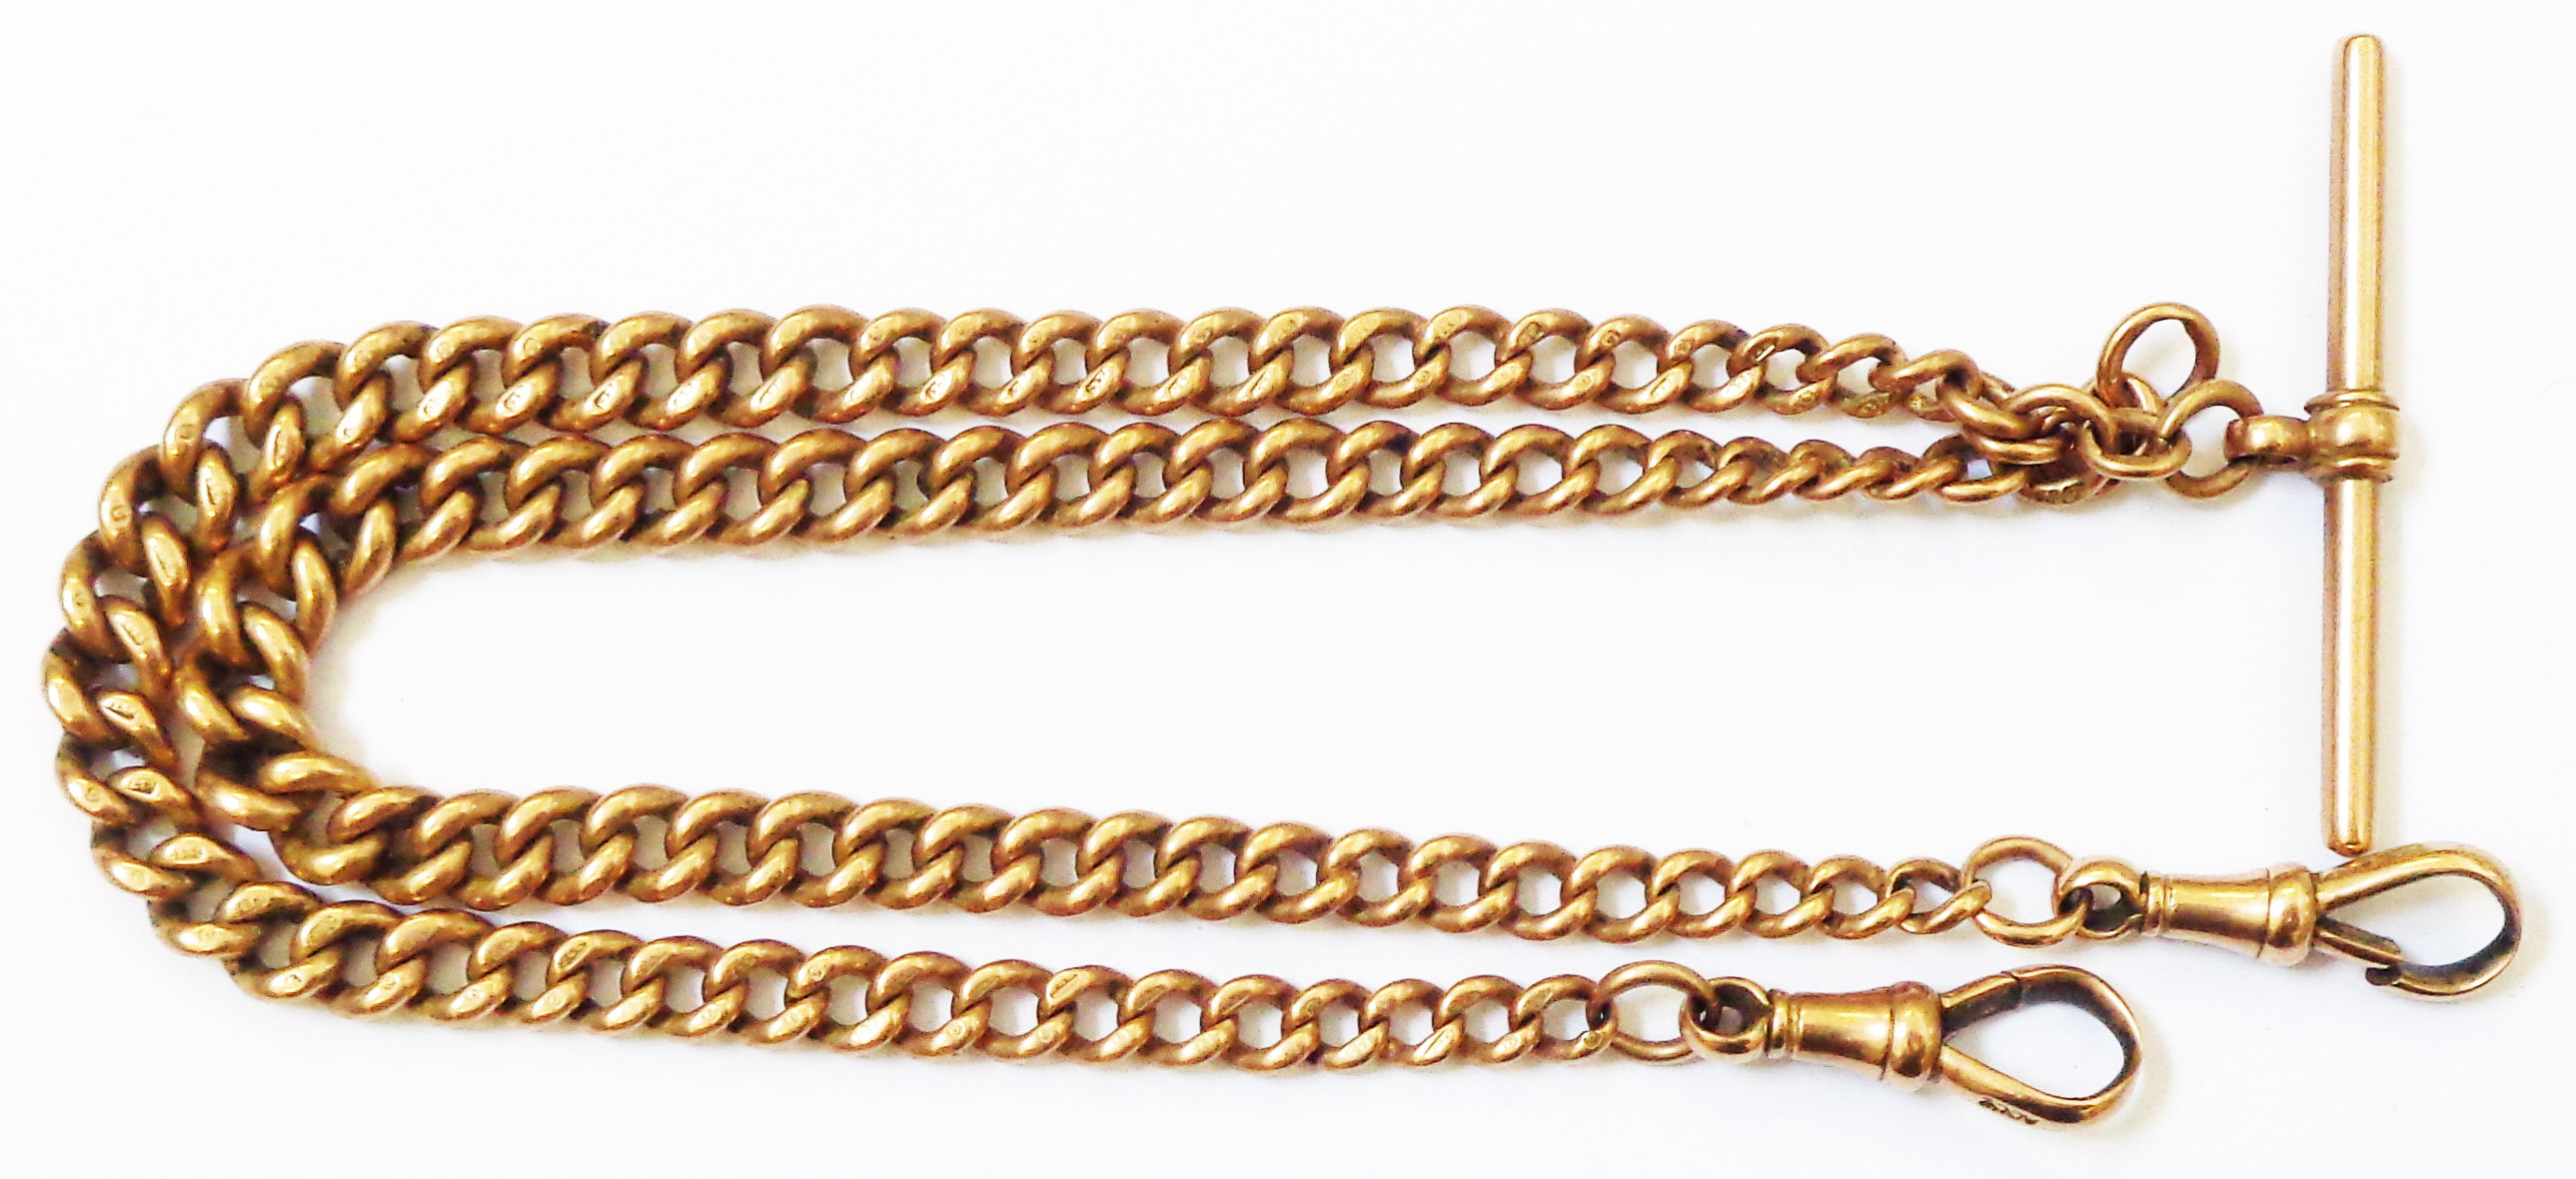 A hallmarked 9/375 rose gold double Albert watch chain with graduated links, two lobster clasps